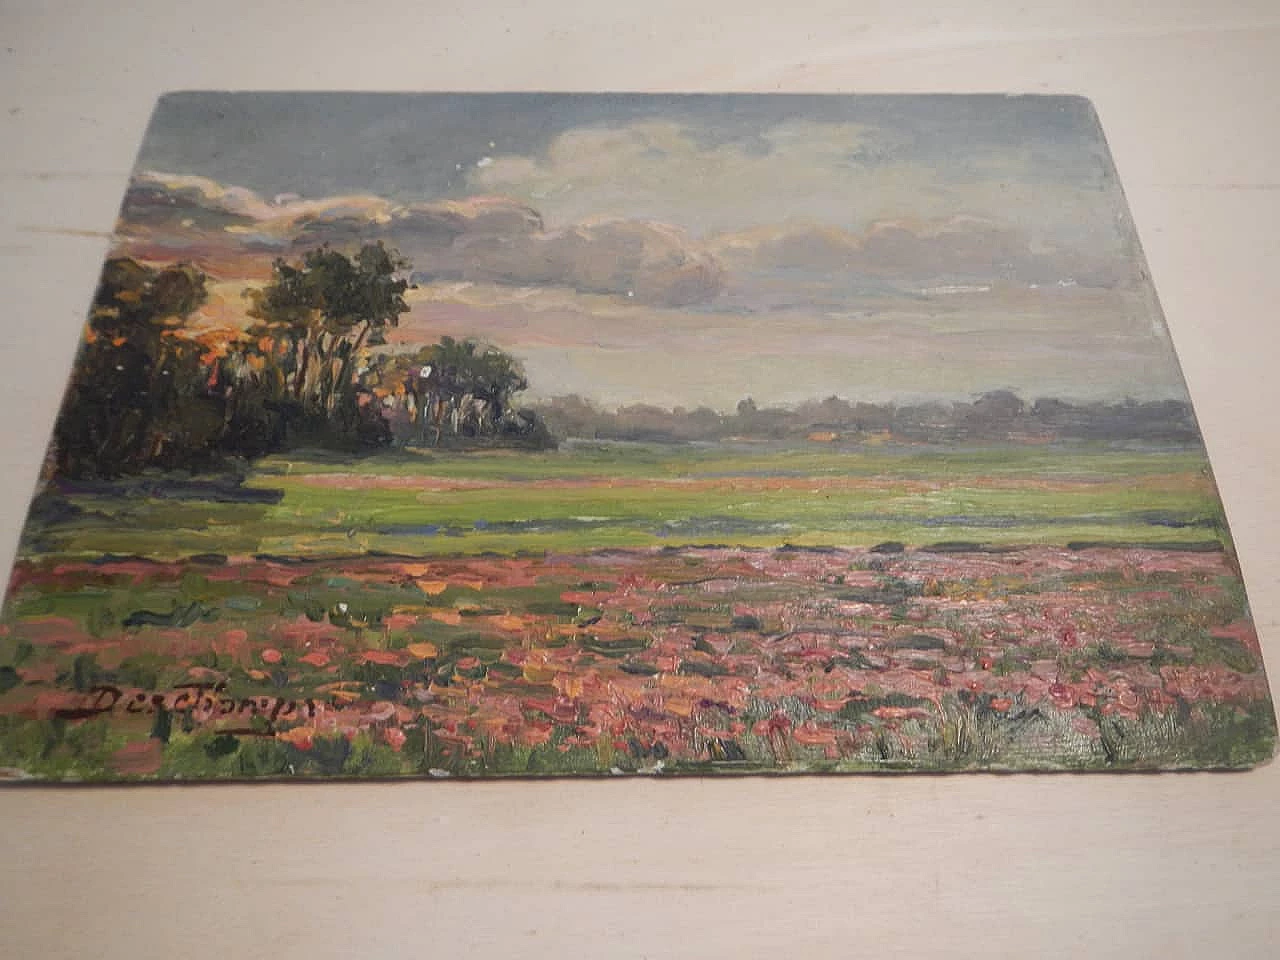 Des Champs, sunset on field, painting on wood, early 20th century 12